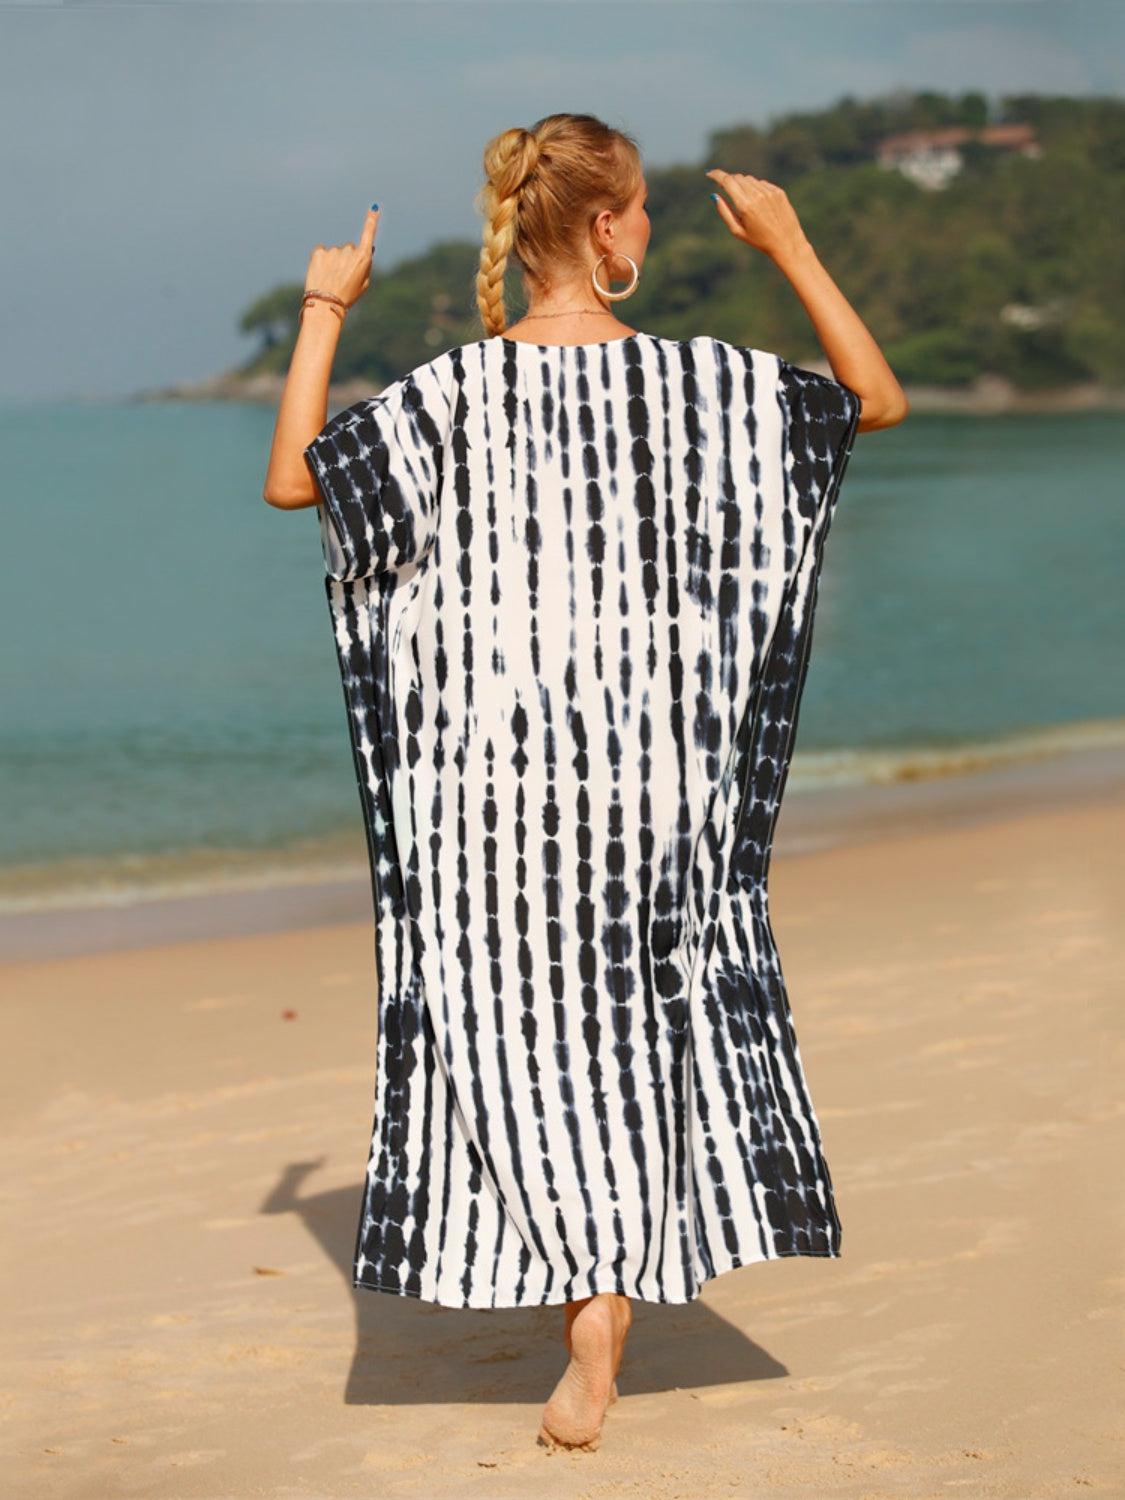 a woman in a black and white towel walking on the beach